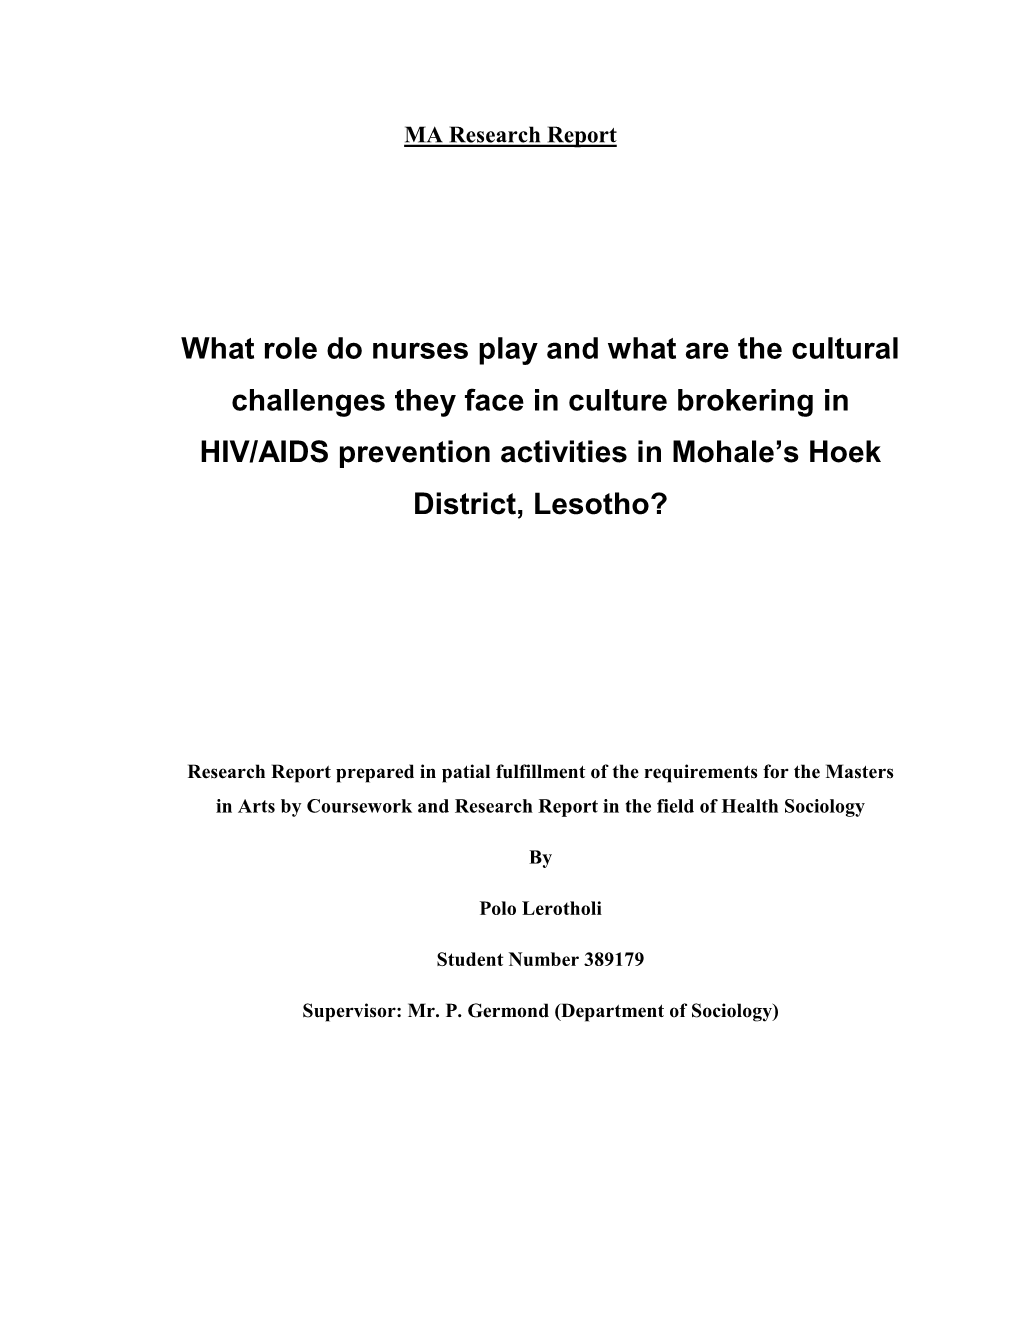 What Role Do Nurses Play and What Are the Cultural Challenges They Face in Culture Brokering in HIV/AIDS Prevention Activities in Mohale’S Hoek District, Lesotho?